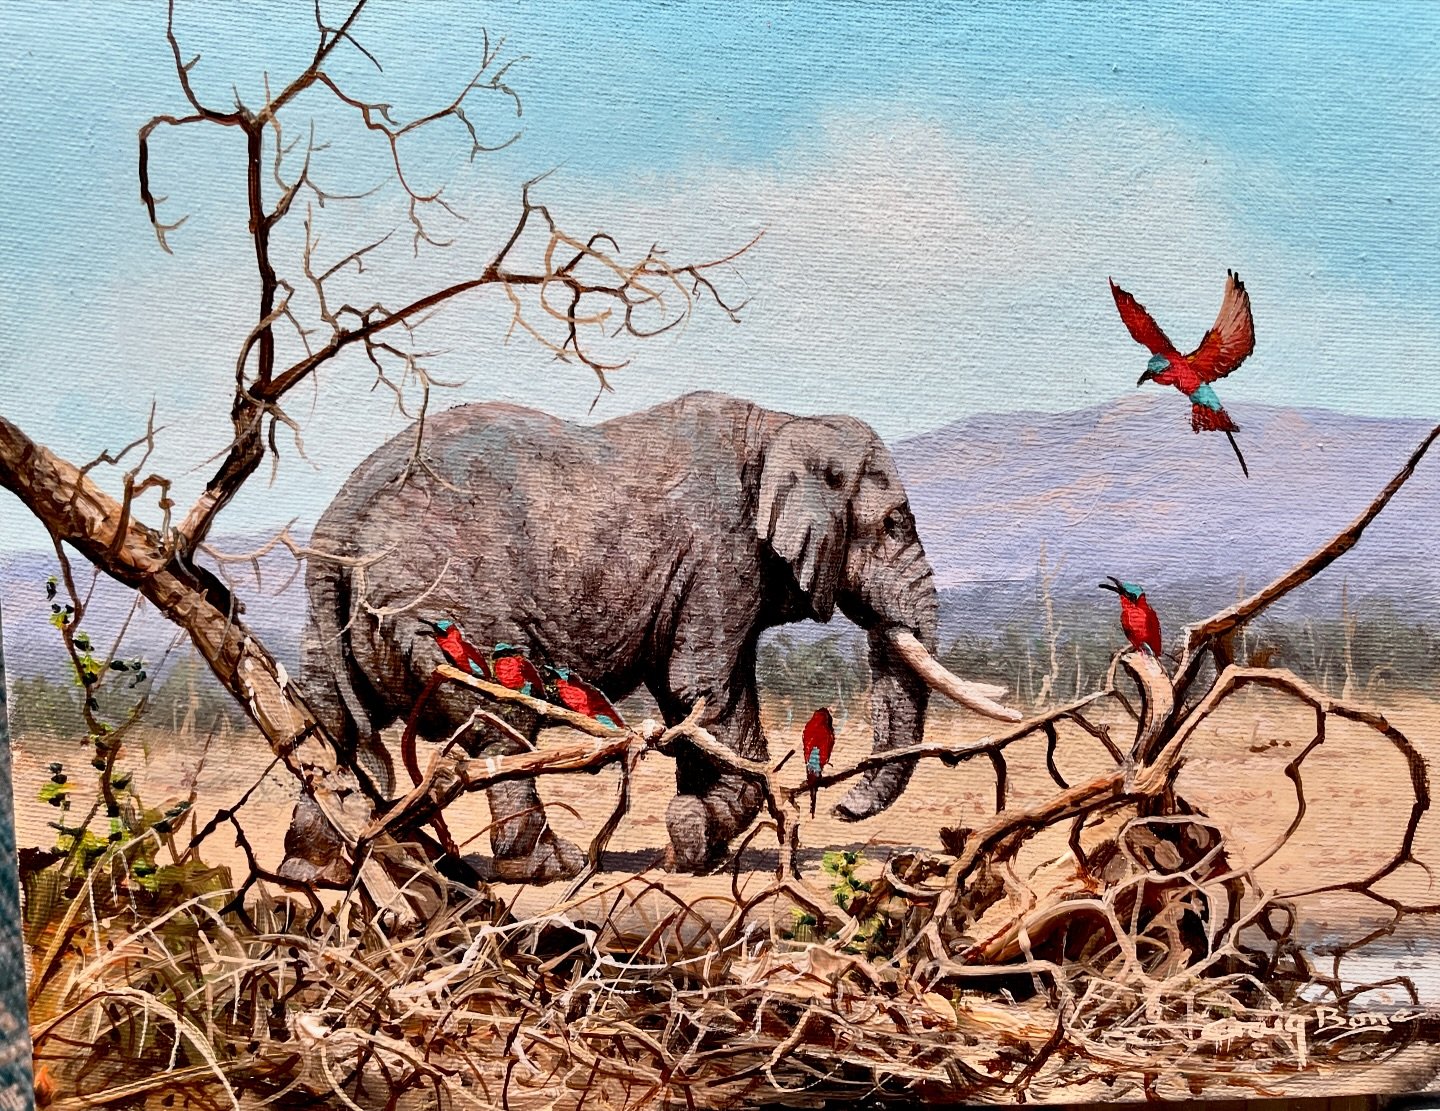 Tiny but mighty! ☀️ This miniature oil painting captures the vastness of the African bush, with a parched foreground leading to a distant escarpment reaching for the clear blue sky.  An elephant approaches a watering hole, while playful Carmine Bee-e